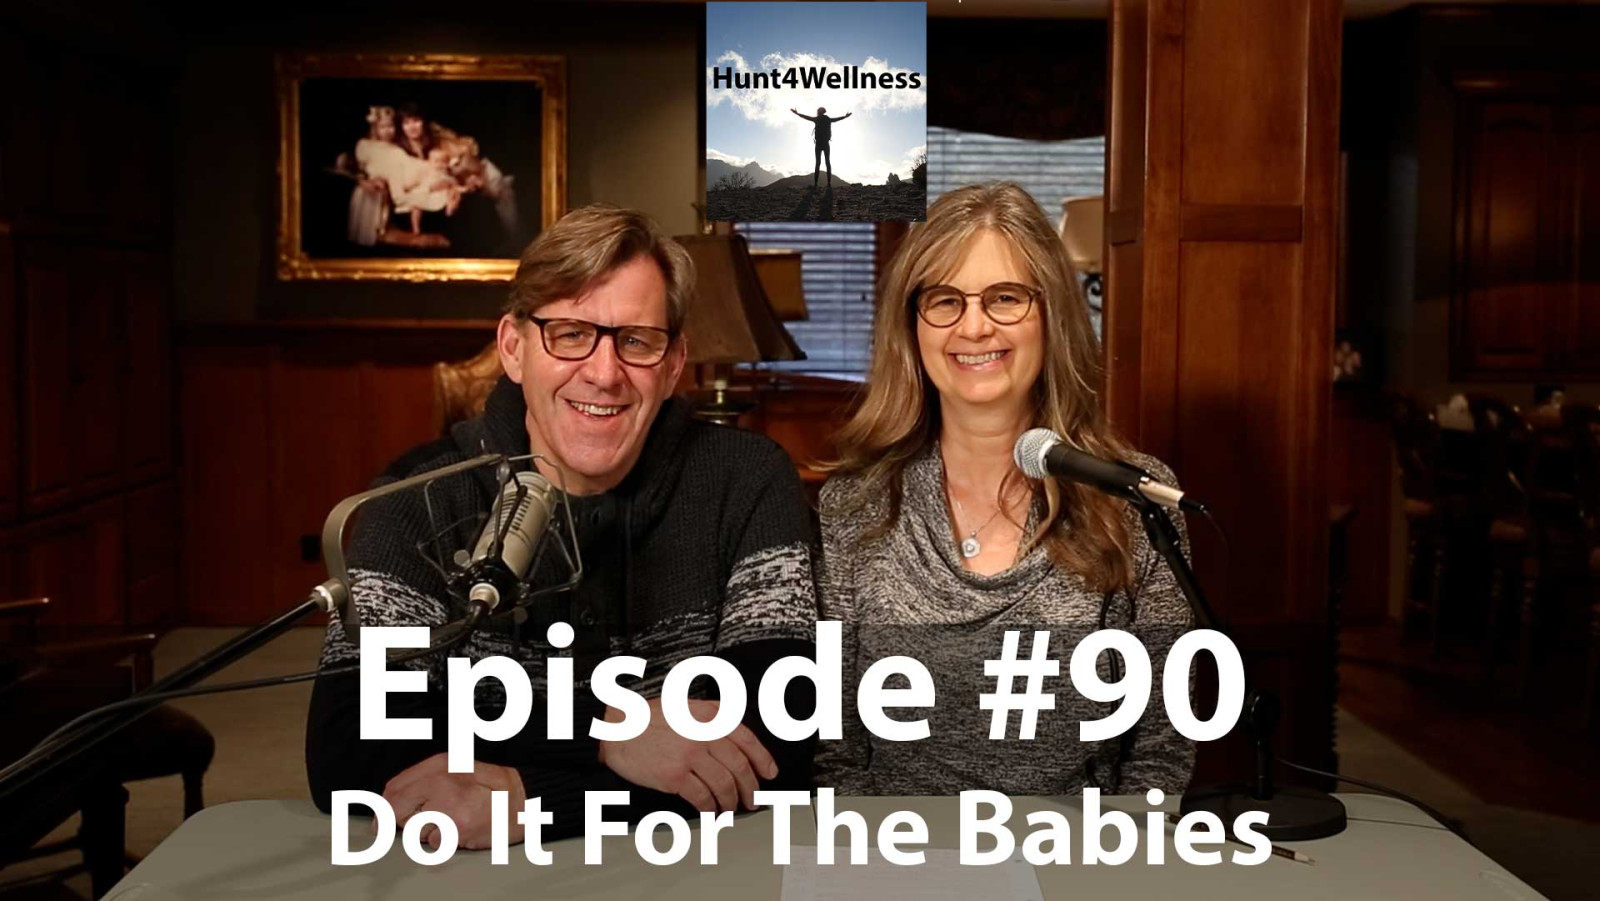 Episode #90 - Do It For The Babies